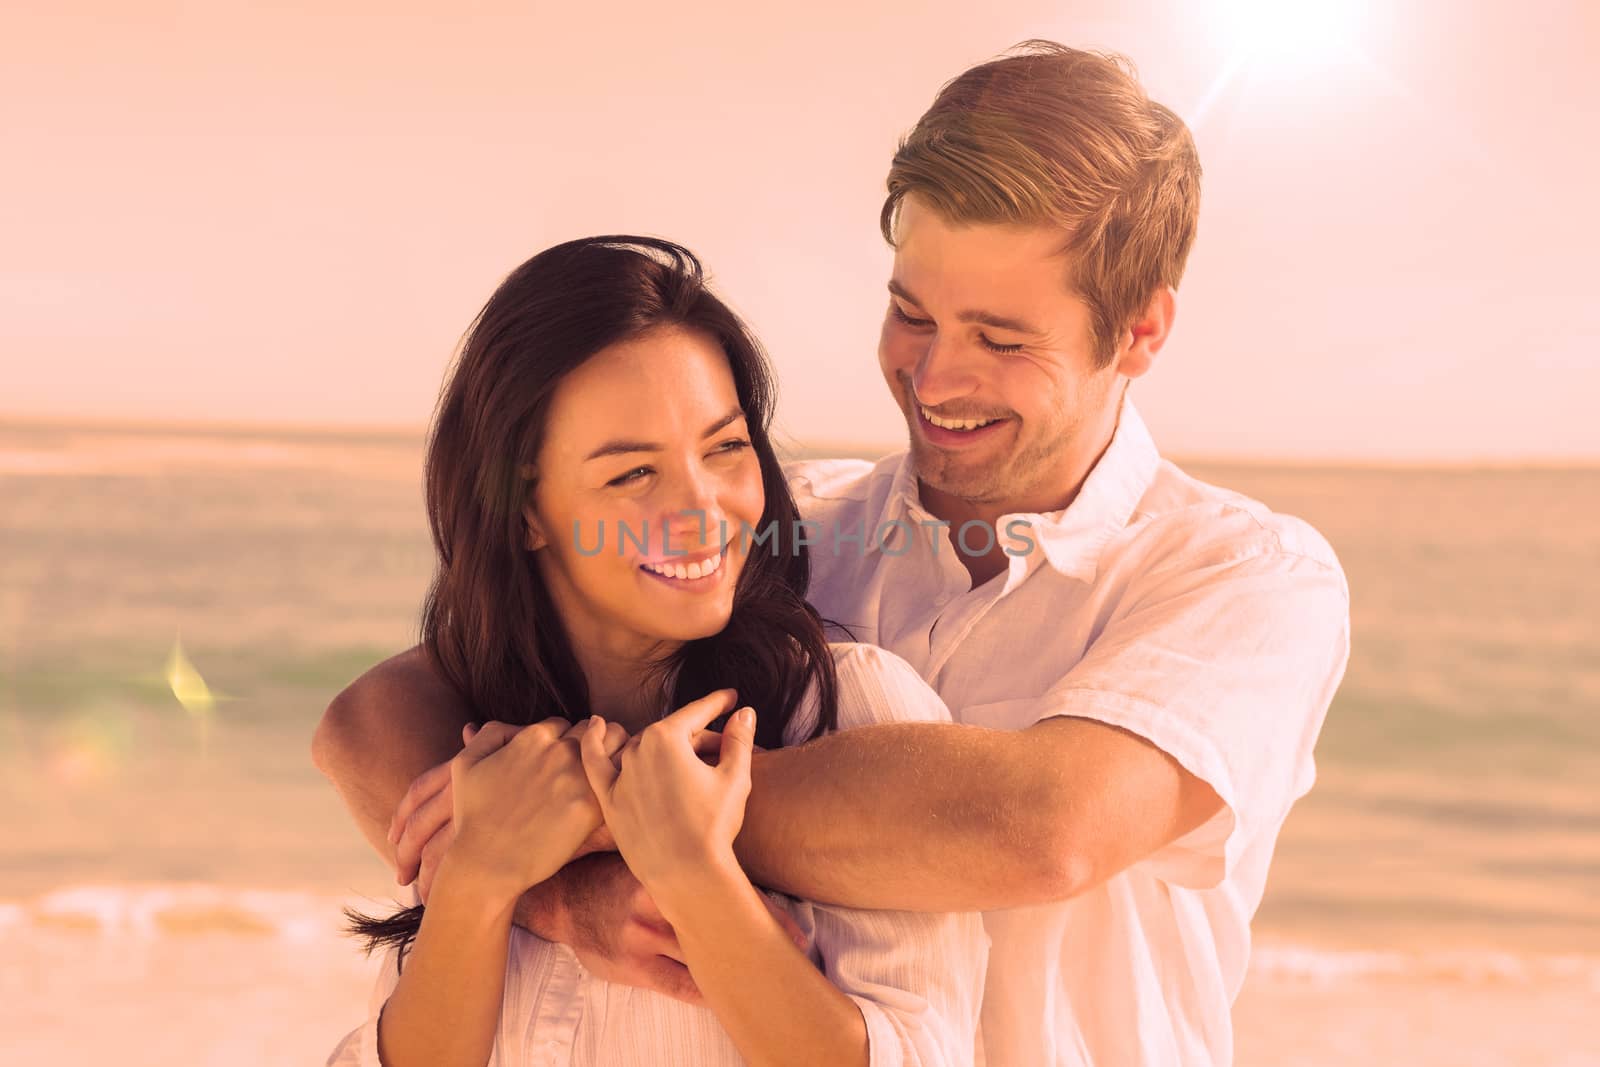 Cheerful couple relaxing and embracing on the beach during summer